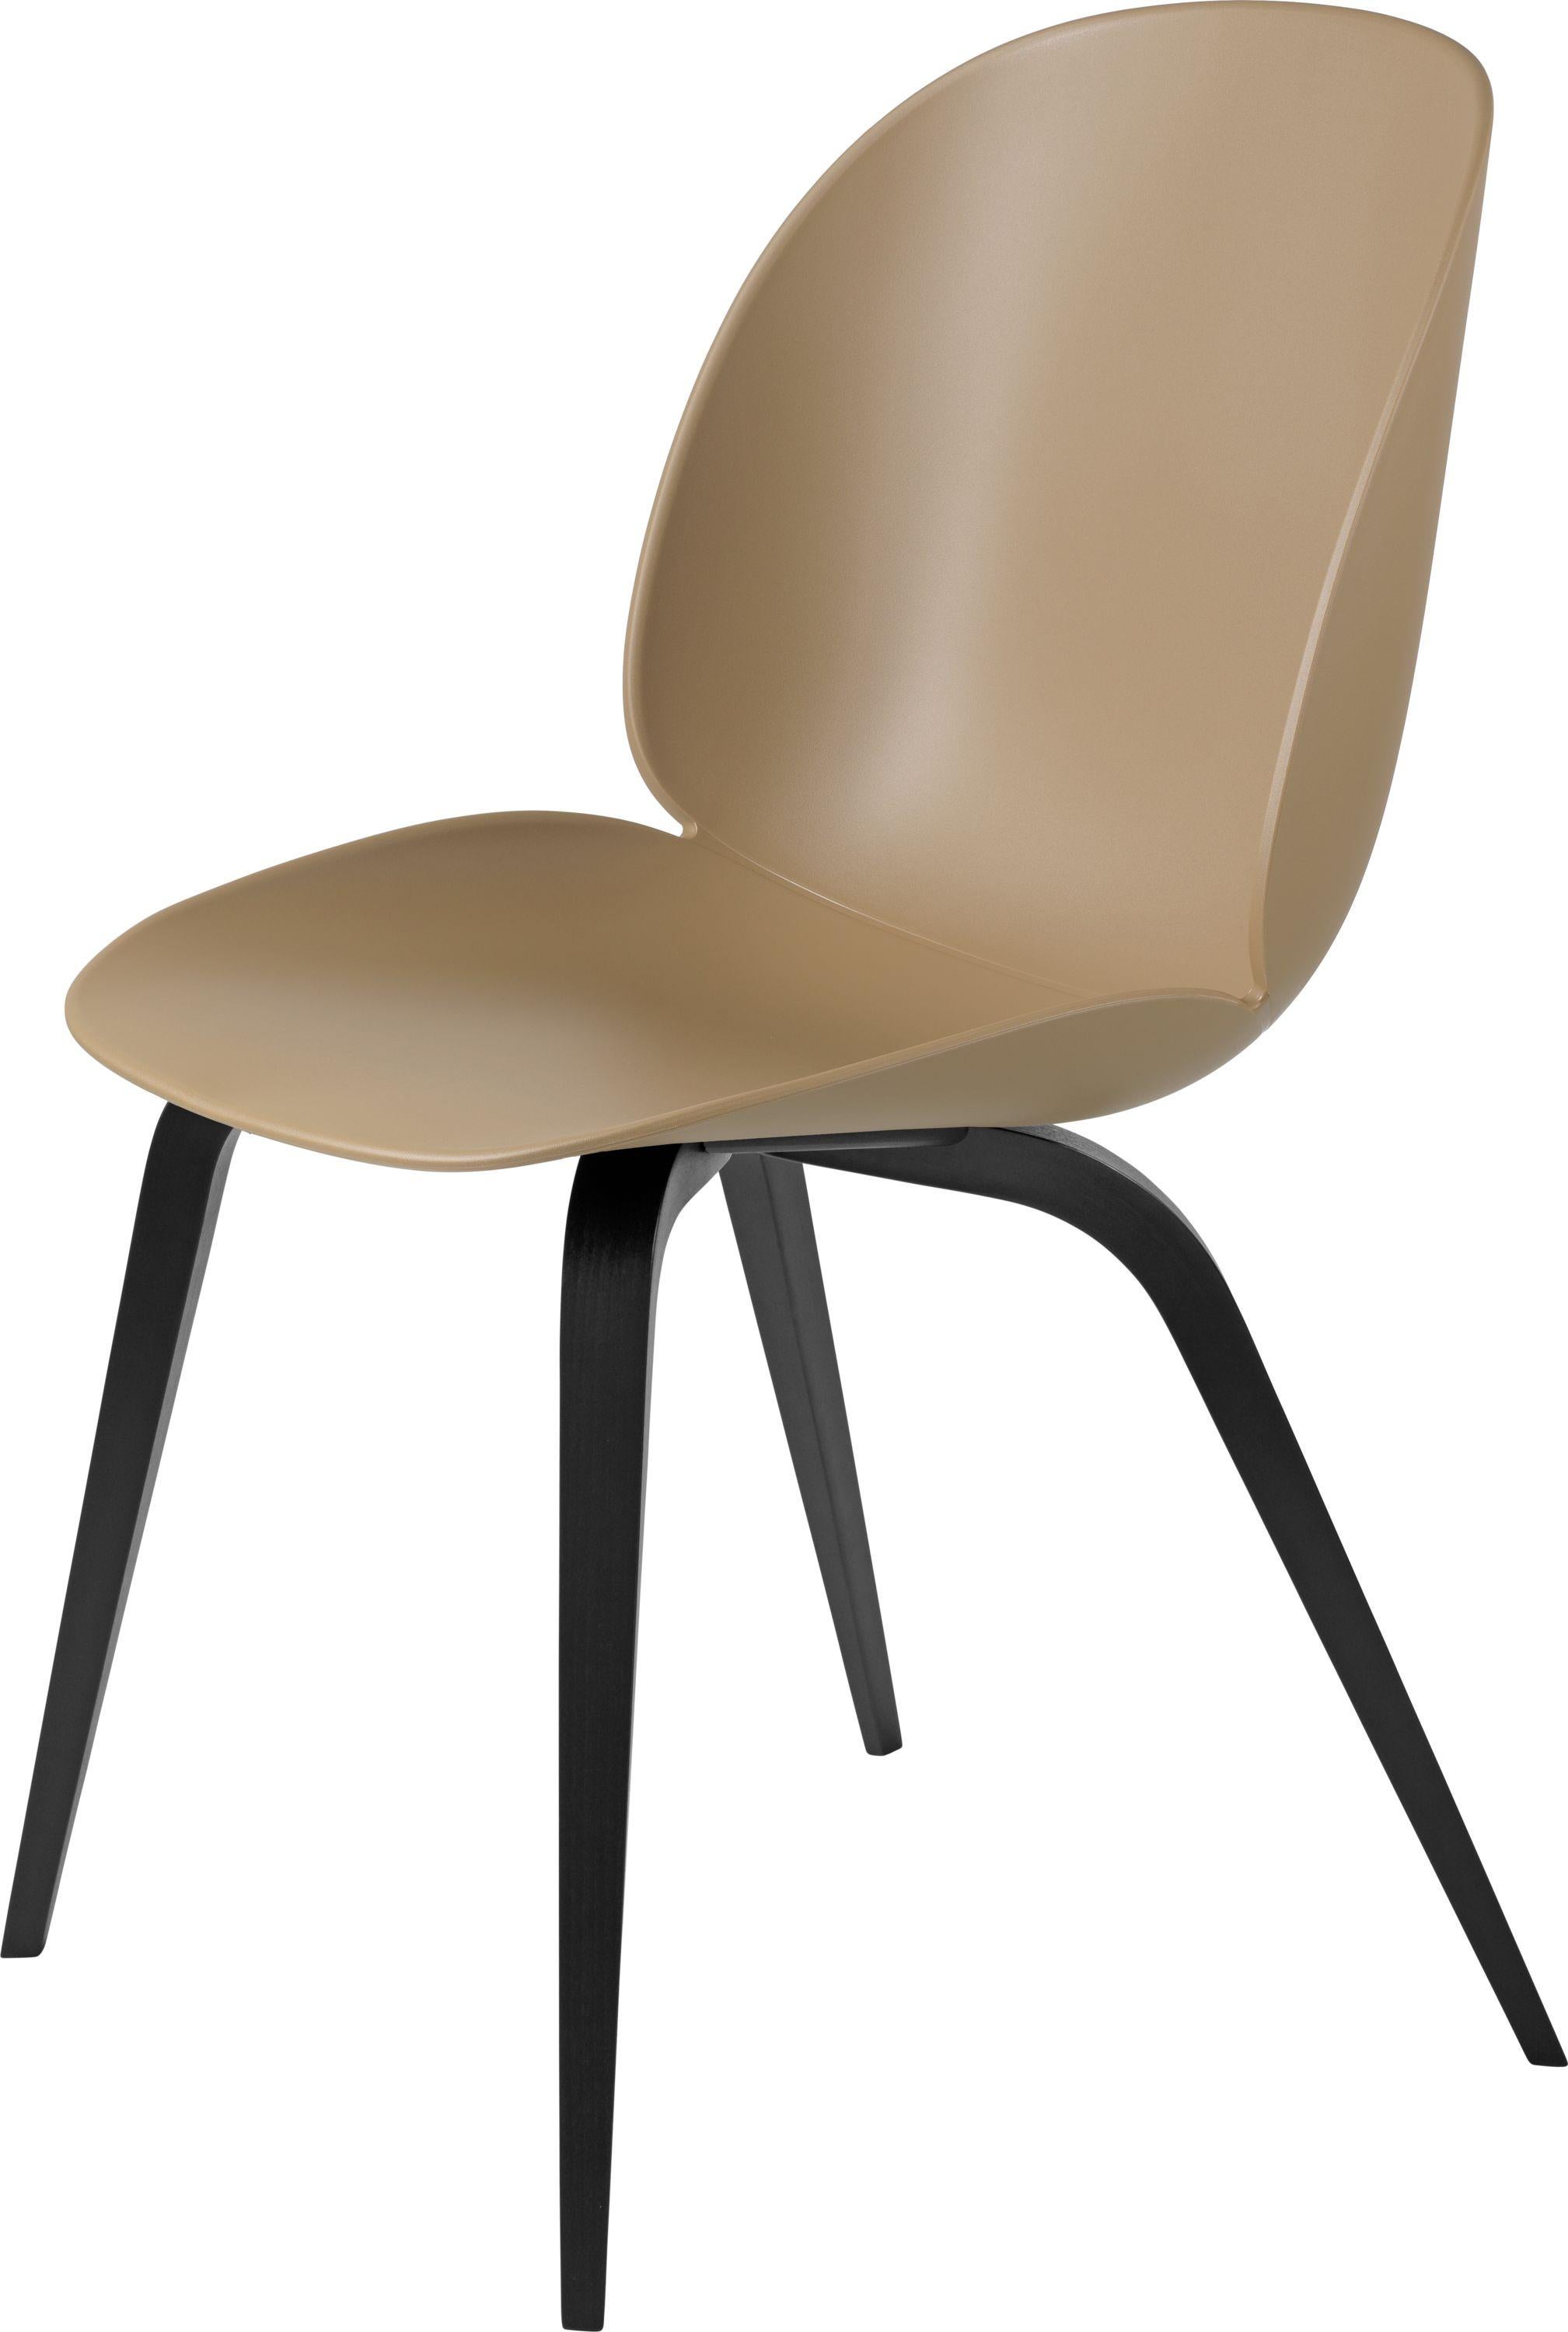 GamFratesi 'Beetle' Dining Chair with Black Stained Beech Conic Base 1